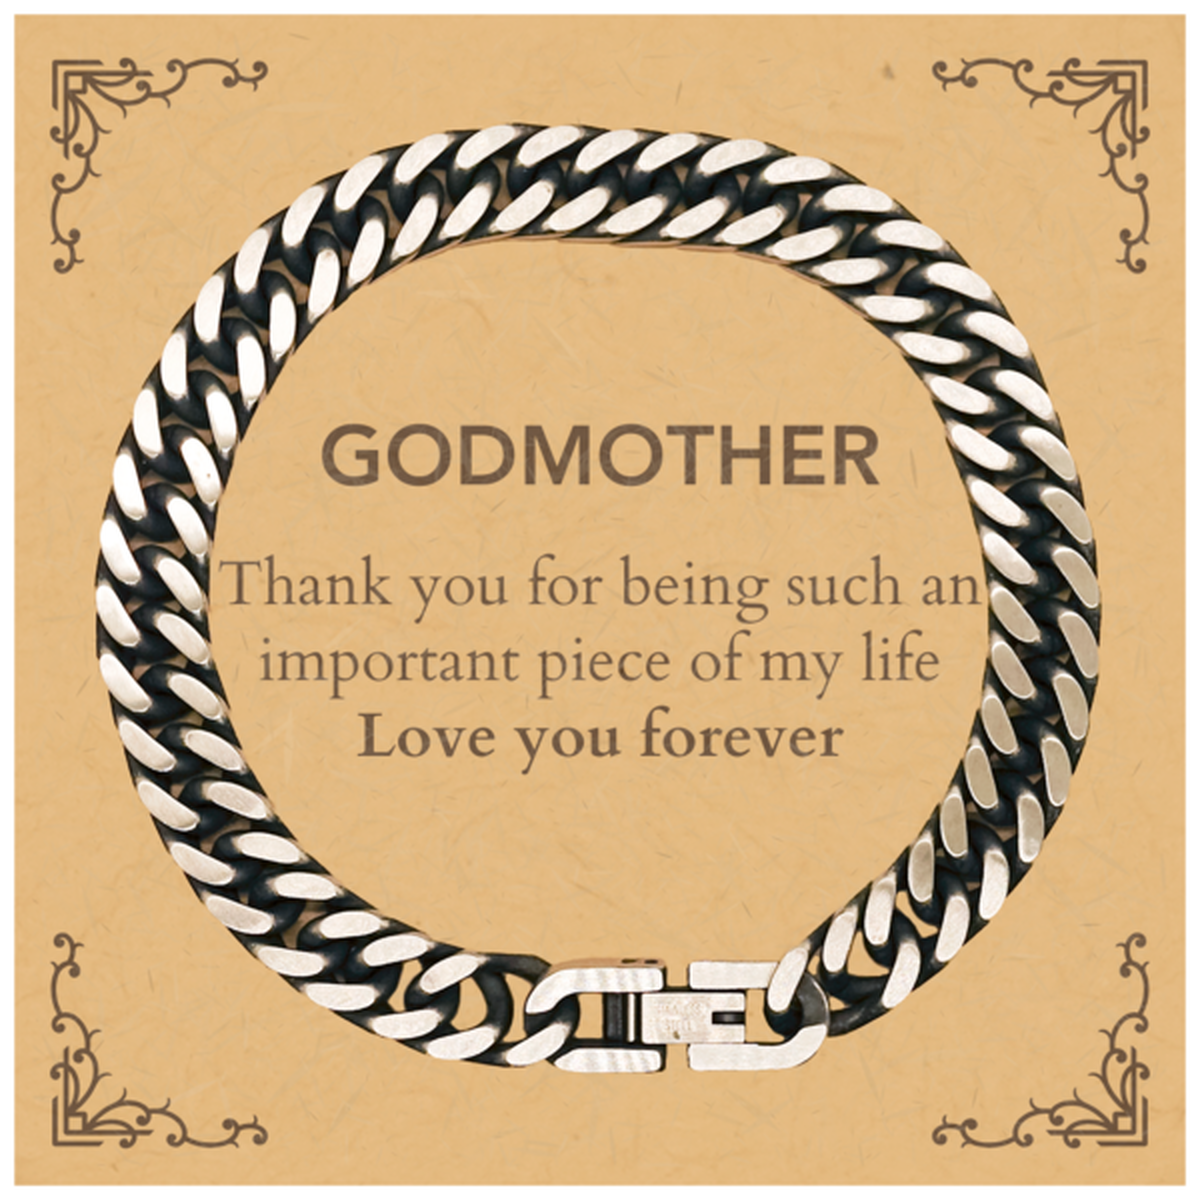 Appropriate Godmother Cuban Link Chain Bracelet Epic Birthday Gifts for Godmother Thank you for being such an important piece of my life Godmother Christmas Mothers Fathers Day